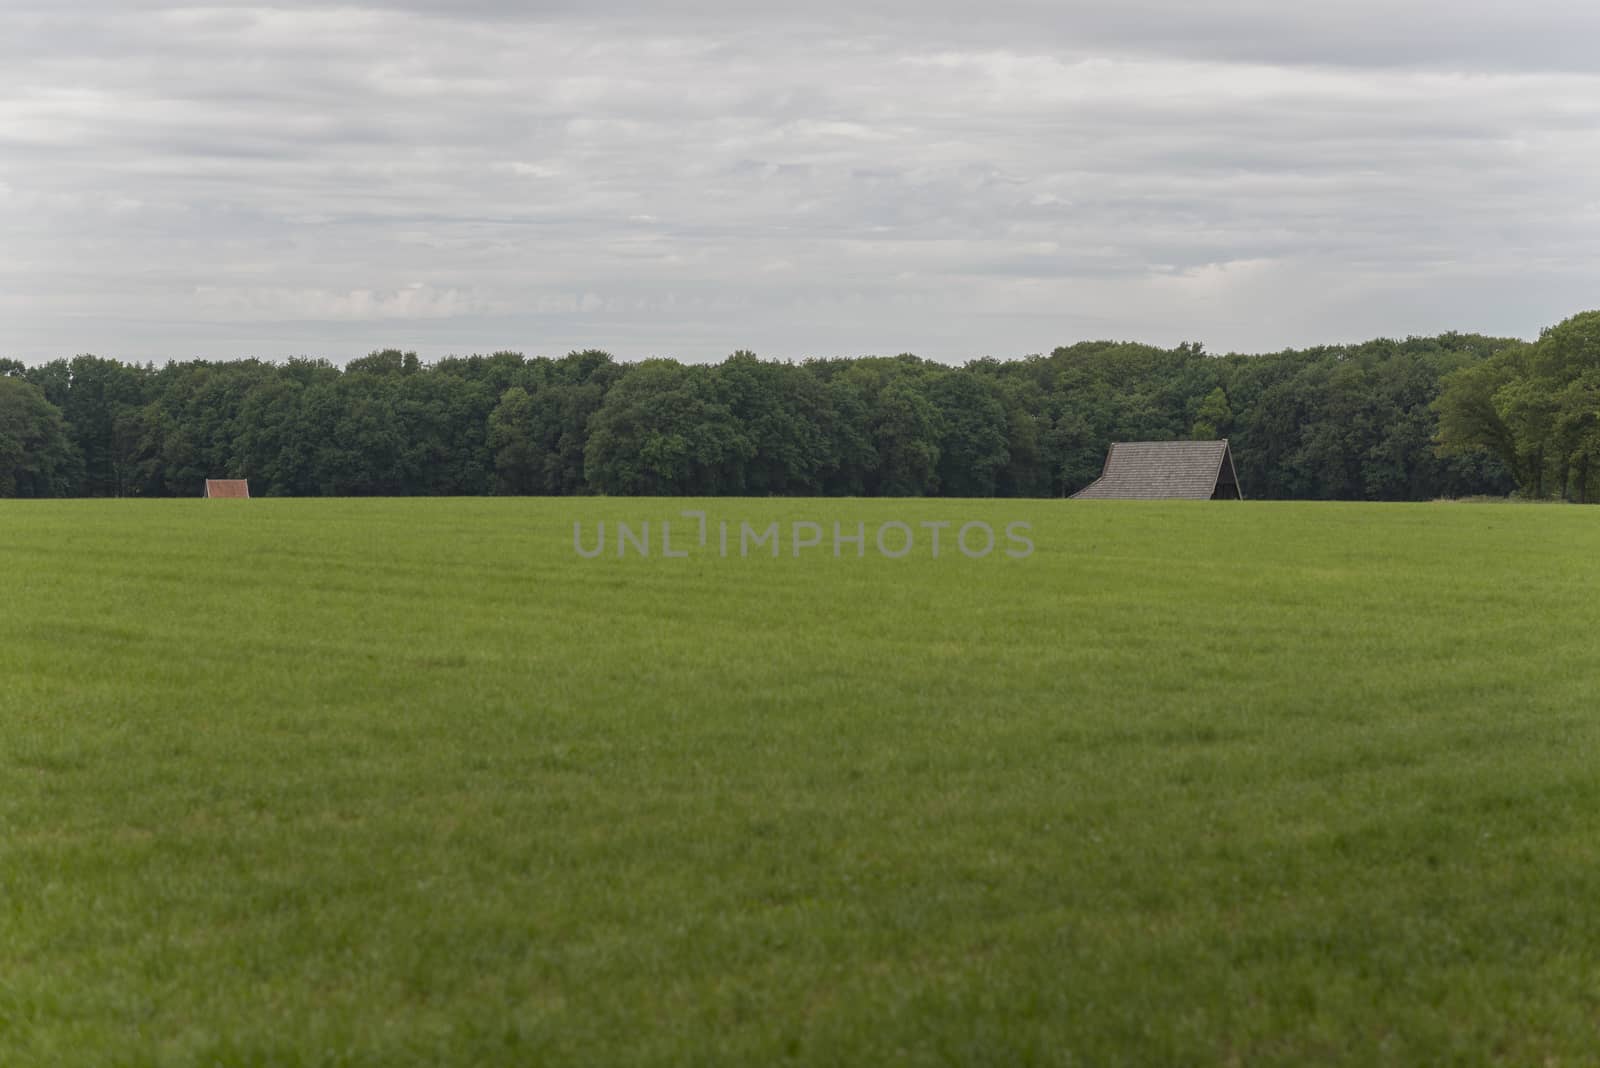 Characteristic half-open farmlands in the Netherlands
 by Tofotografie